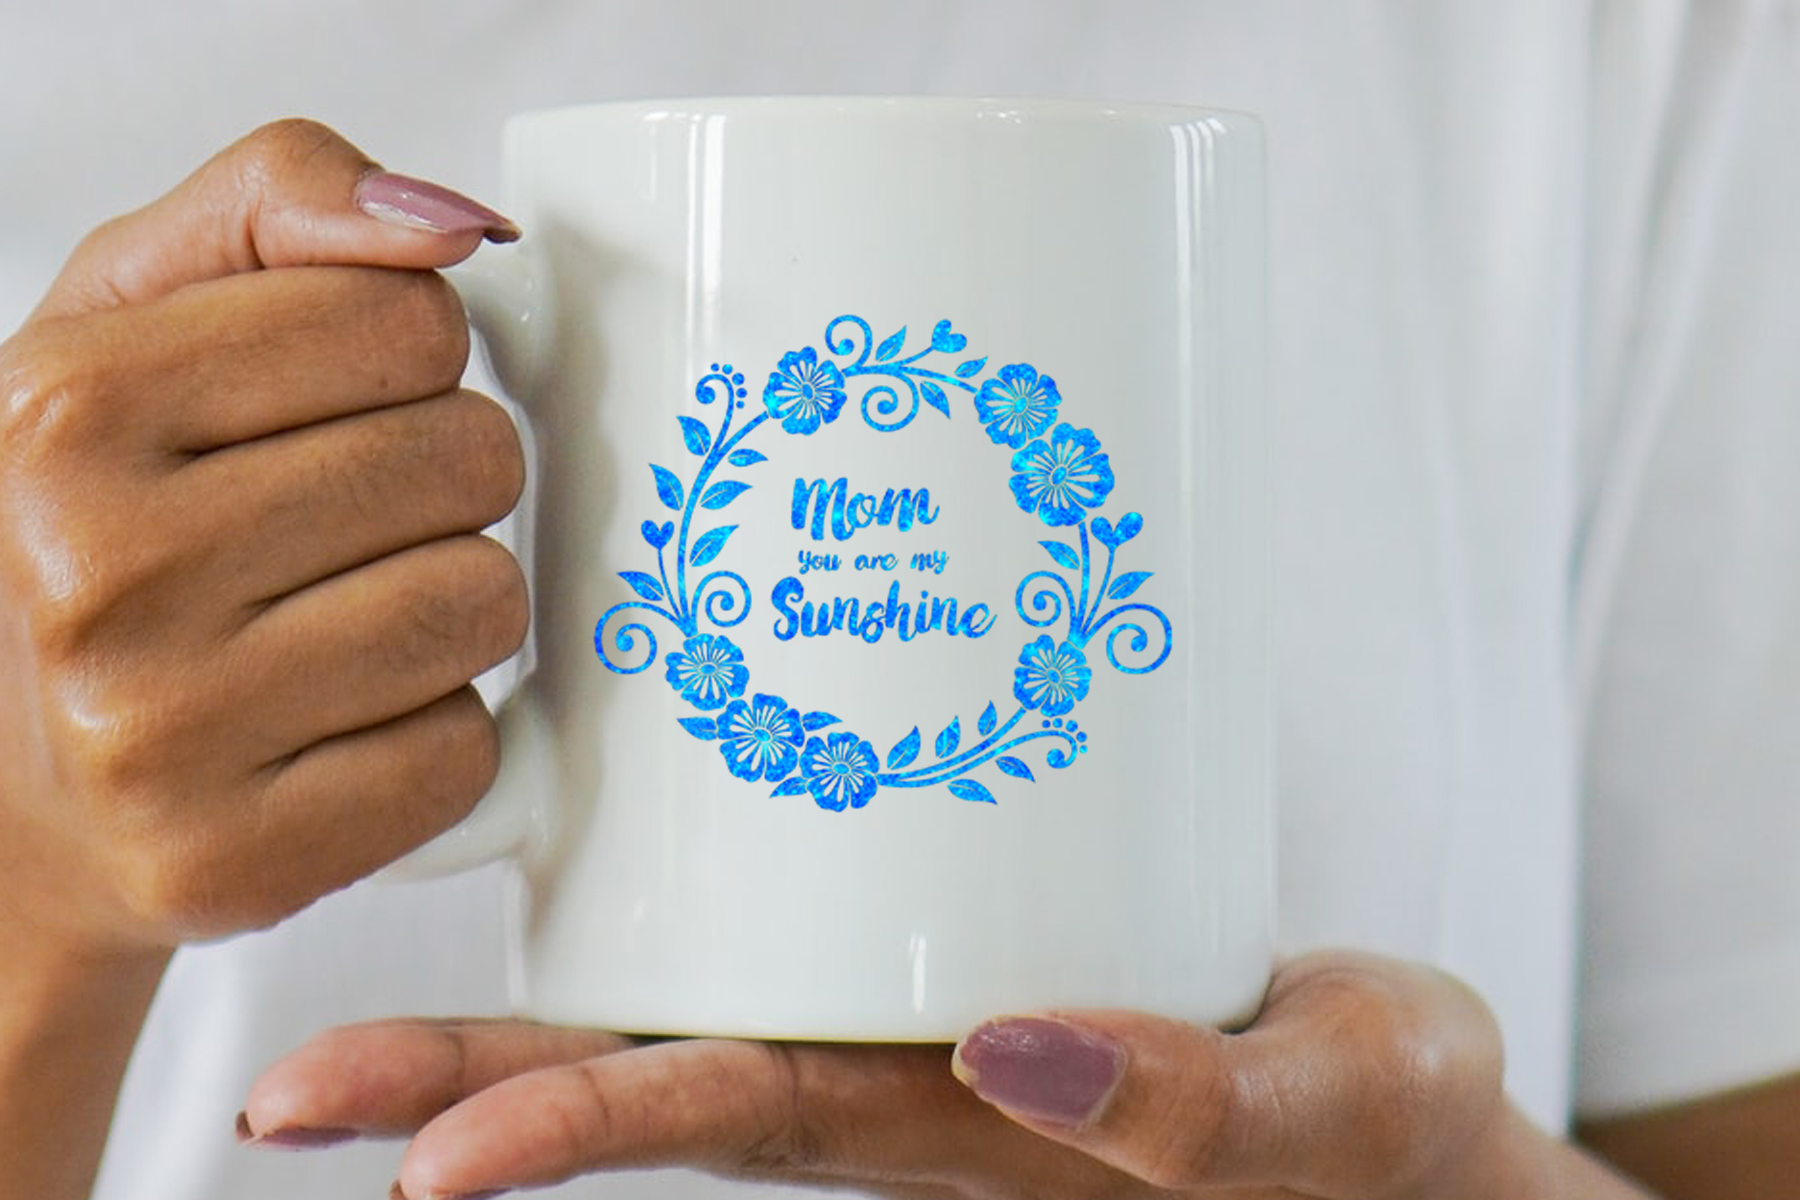 Woman holding a coffee mug with a blue floral design.